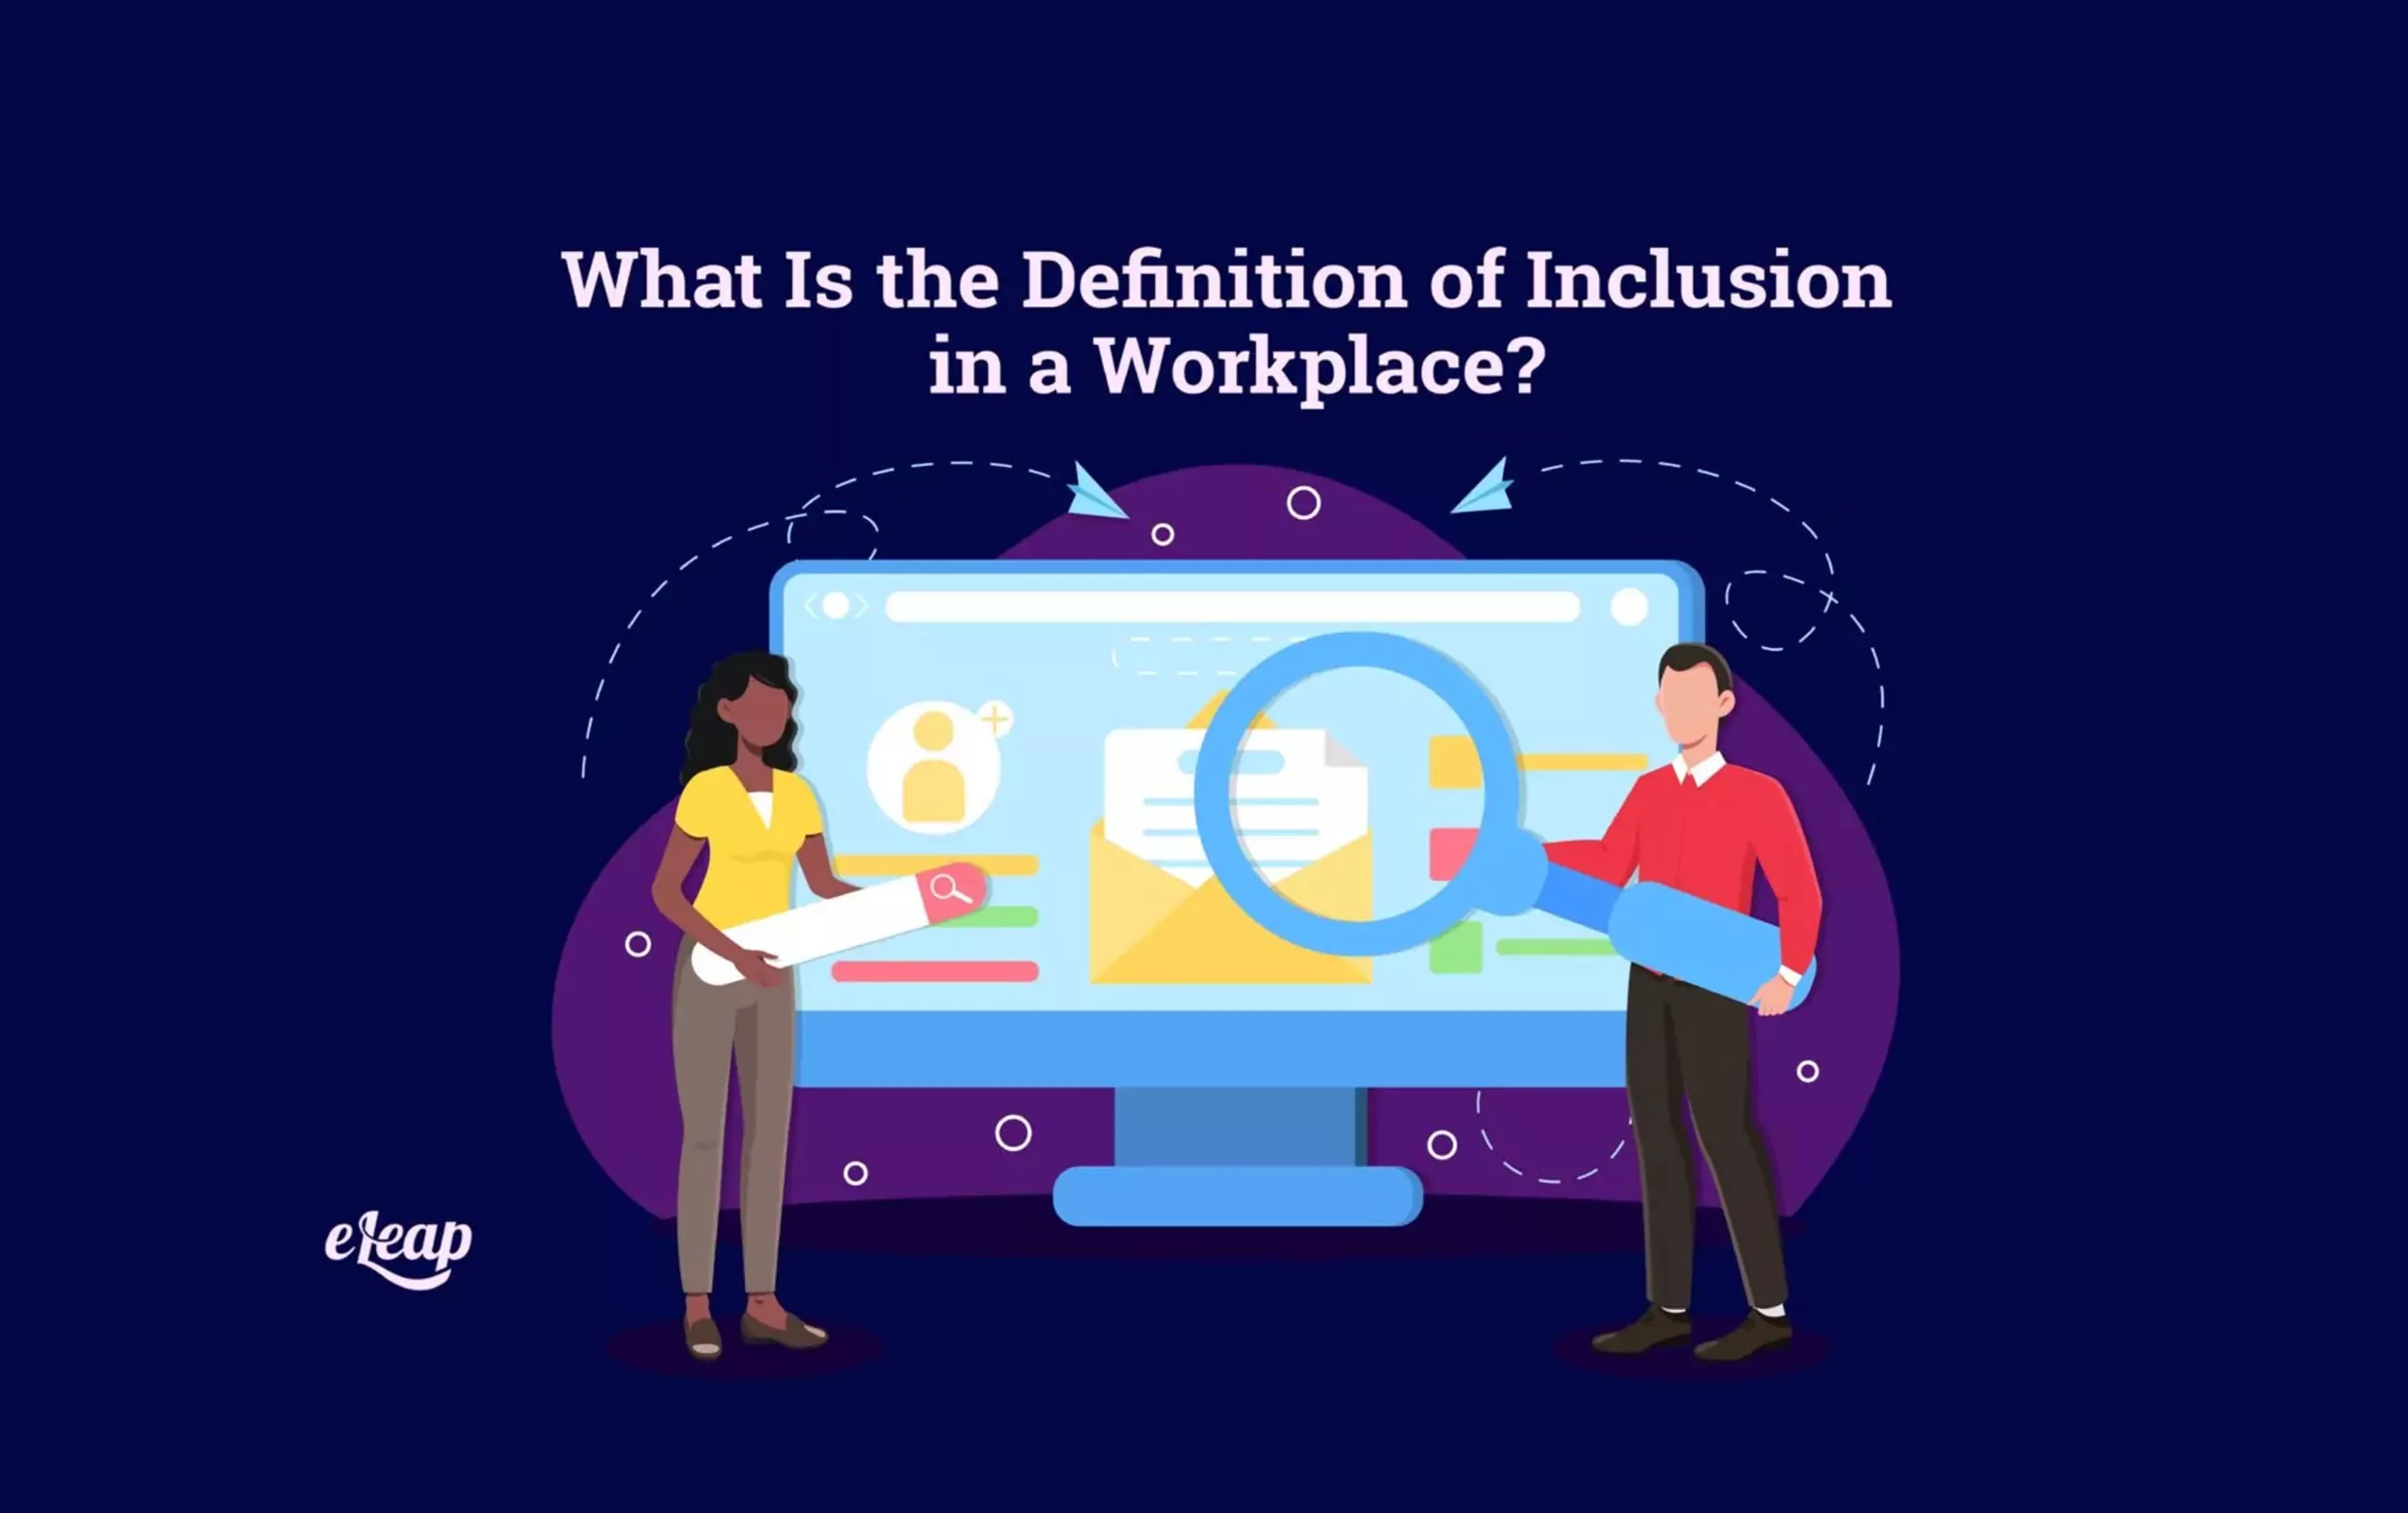 Inclusion in a Workplace